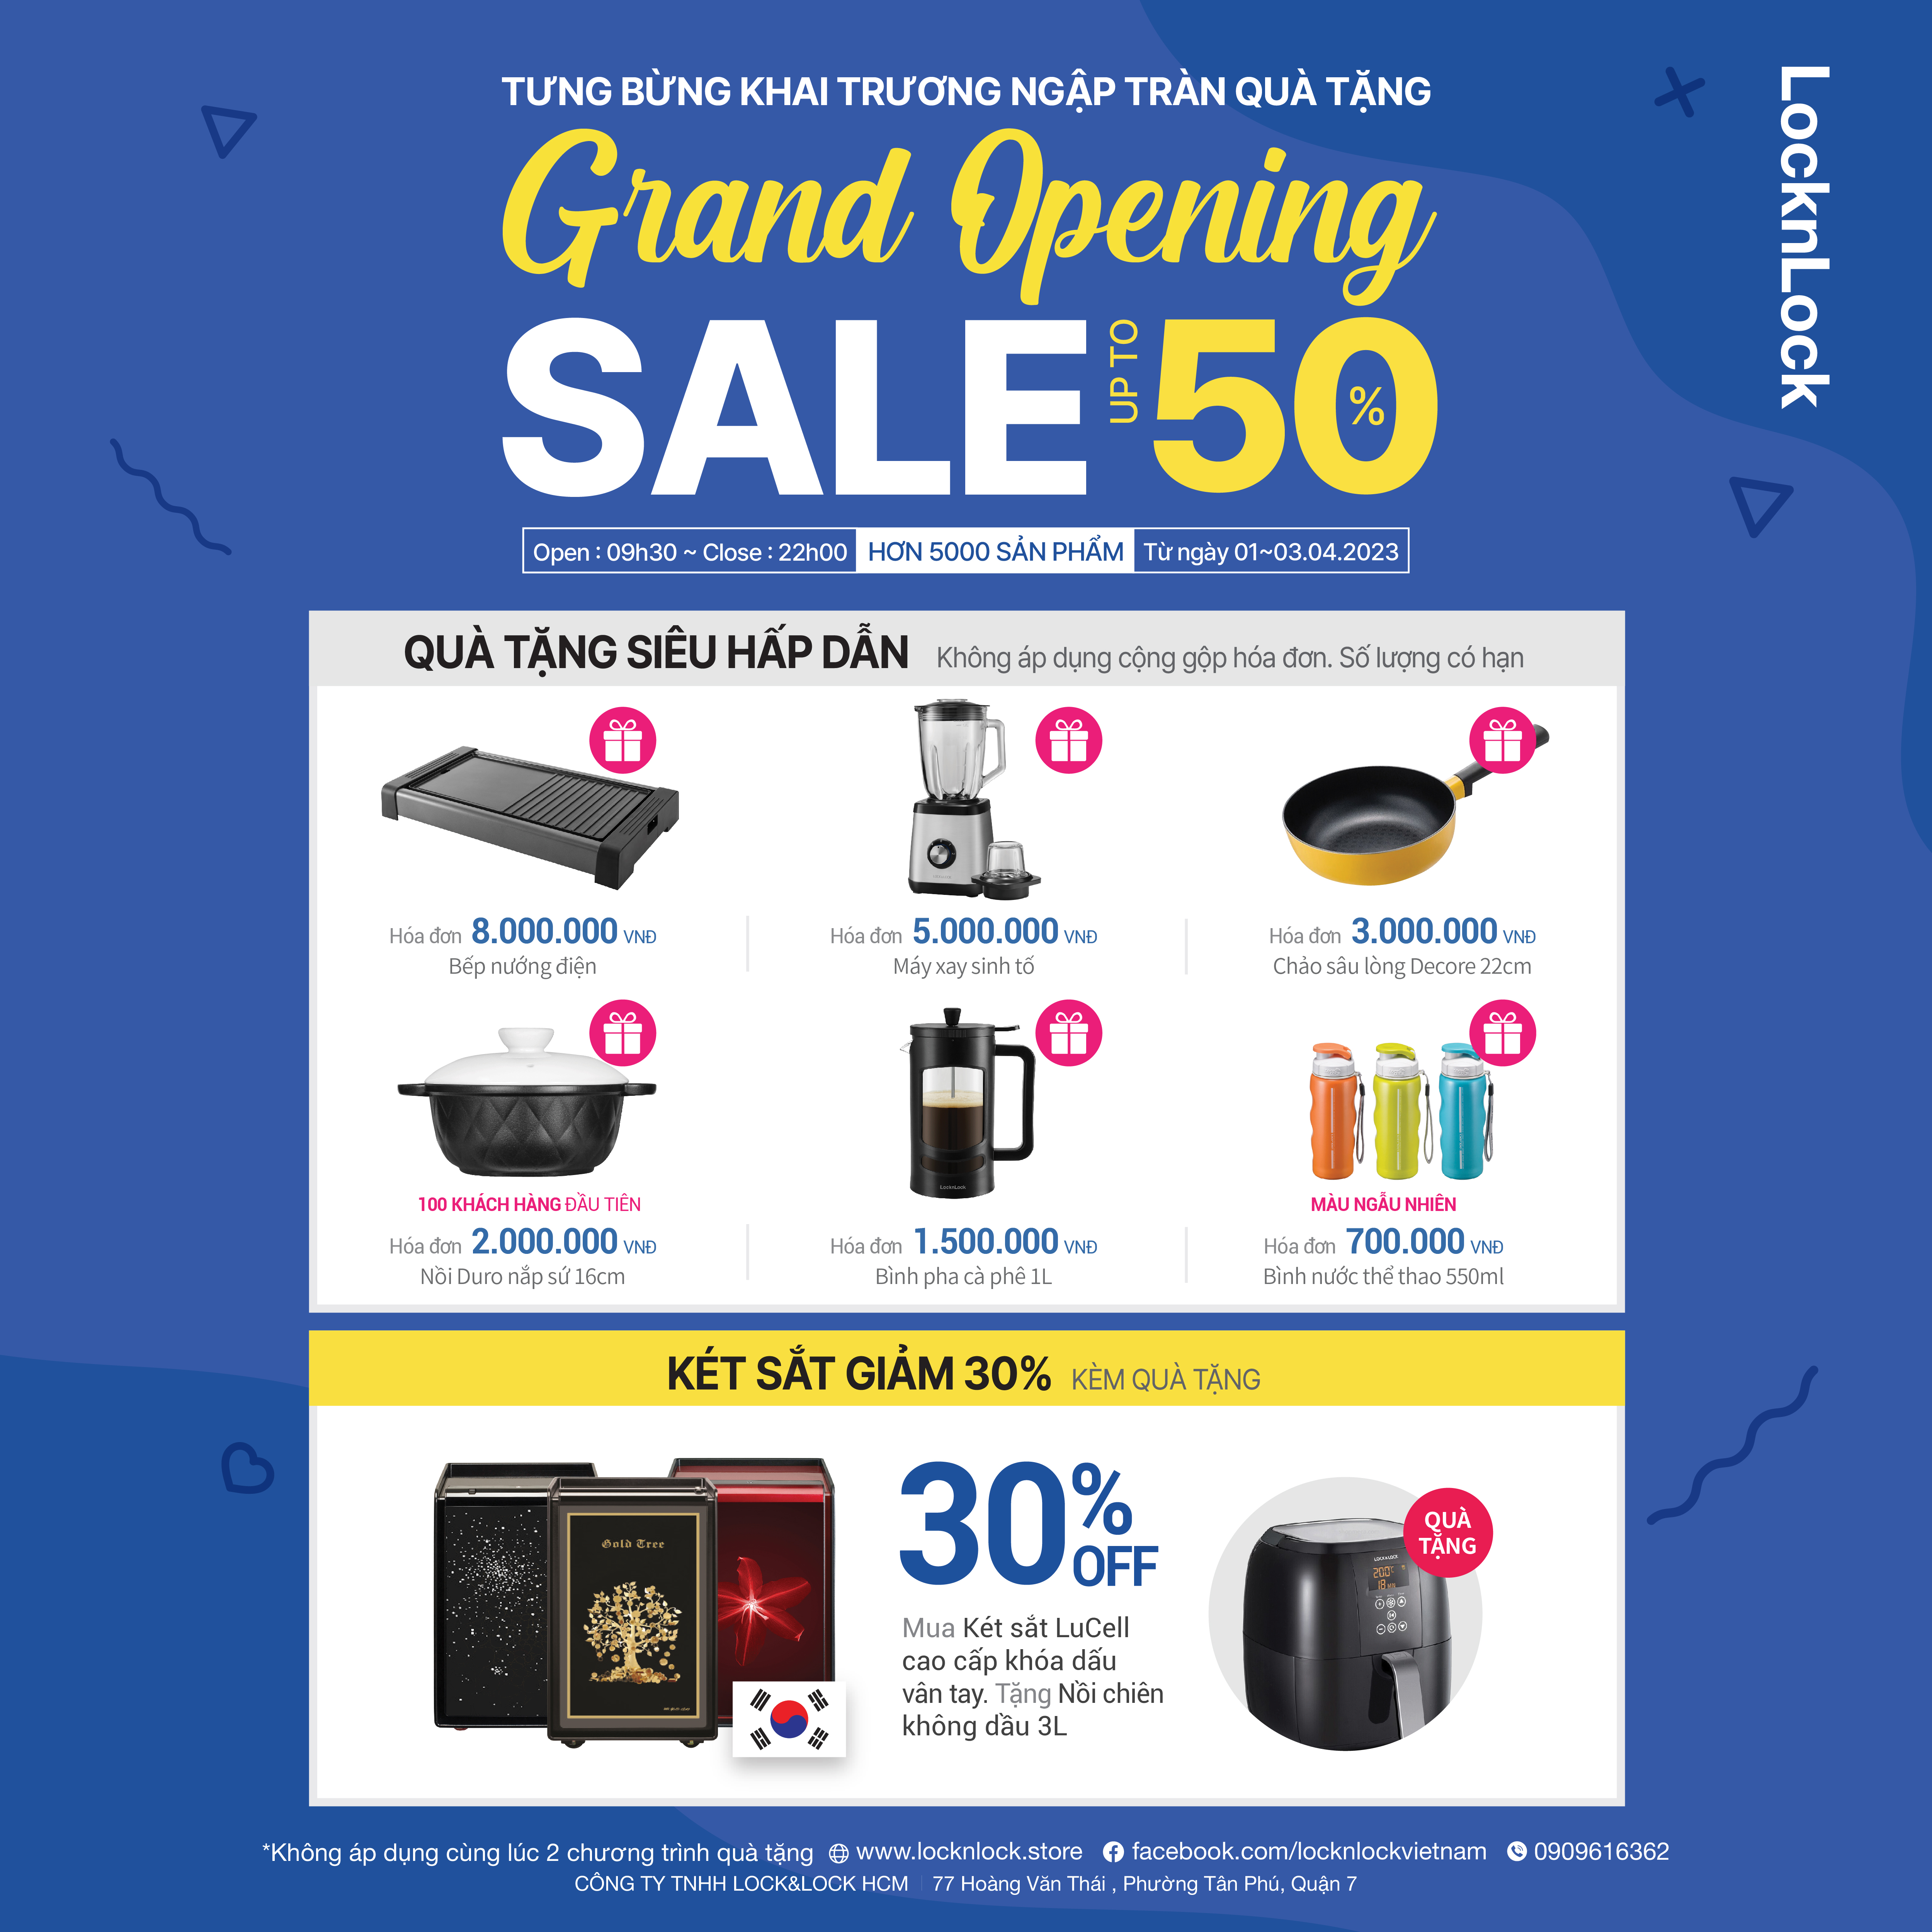 GRAND OPENING WITH THOUSANDS OF GREAT DEALS AND AMAZING GIFTS